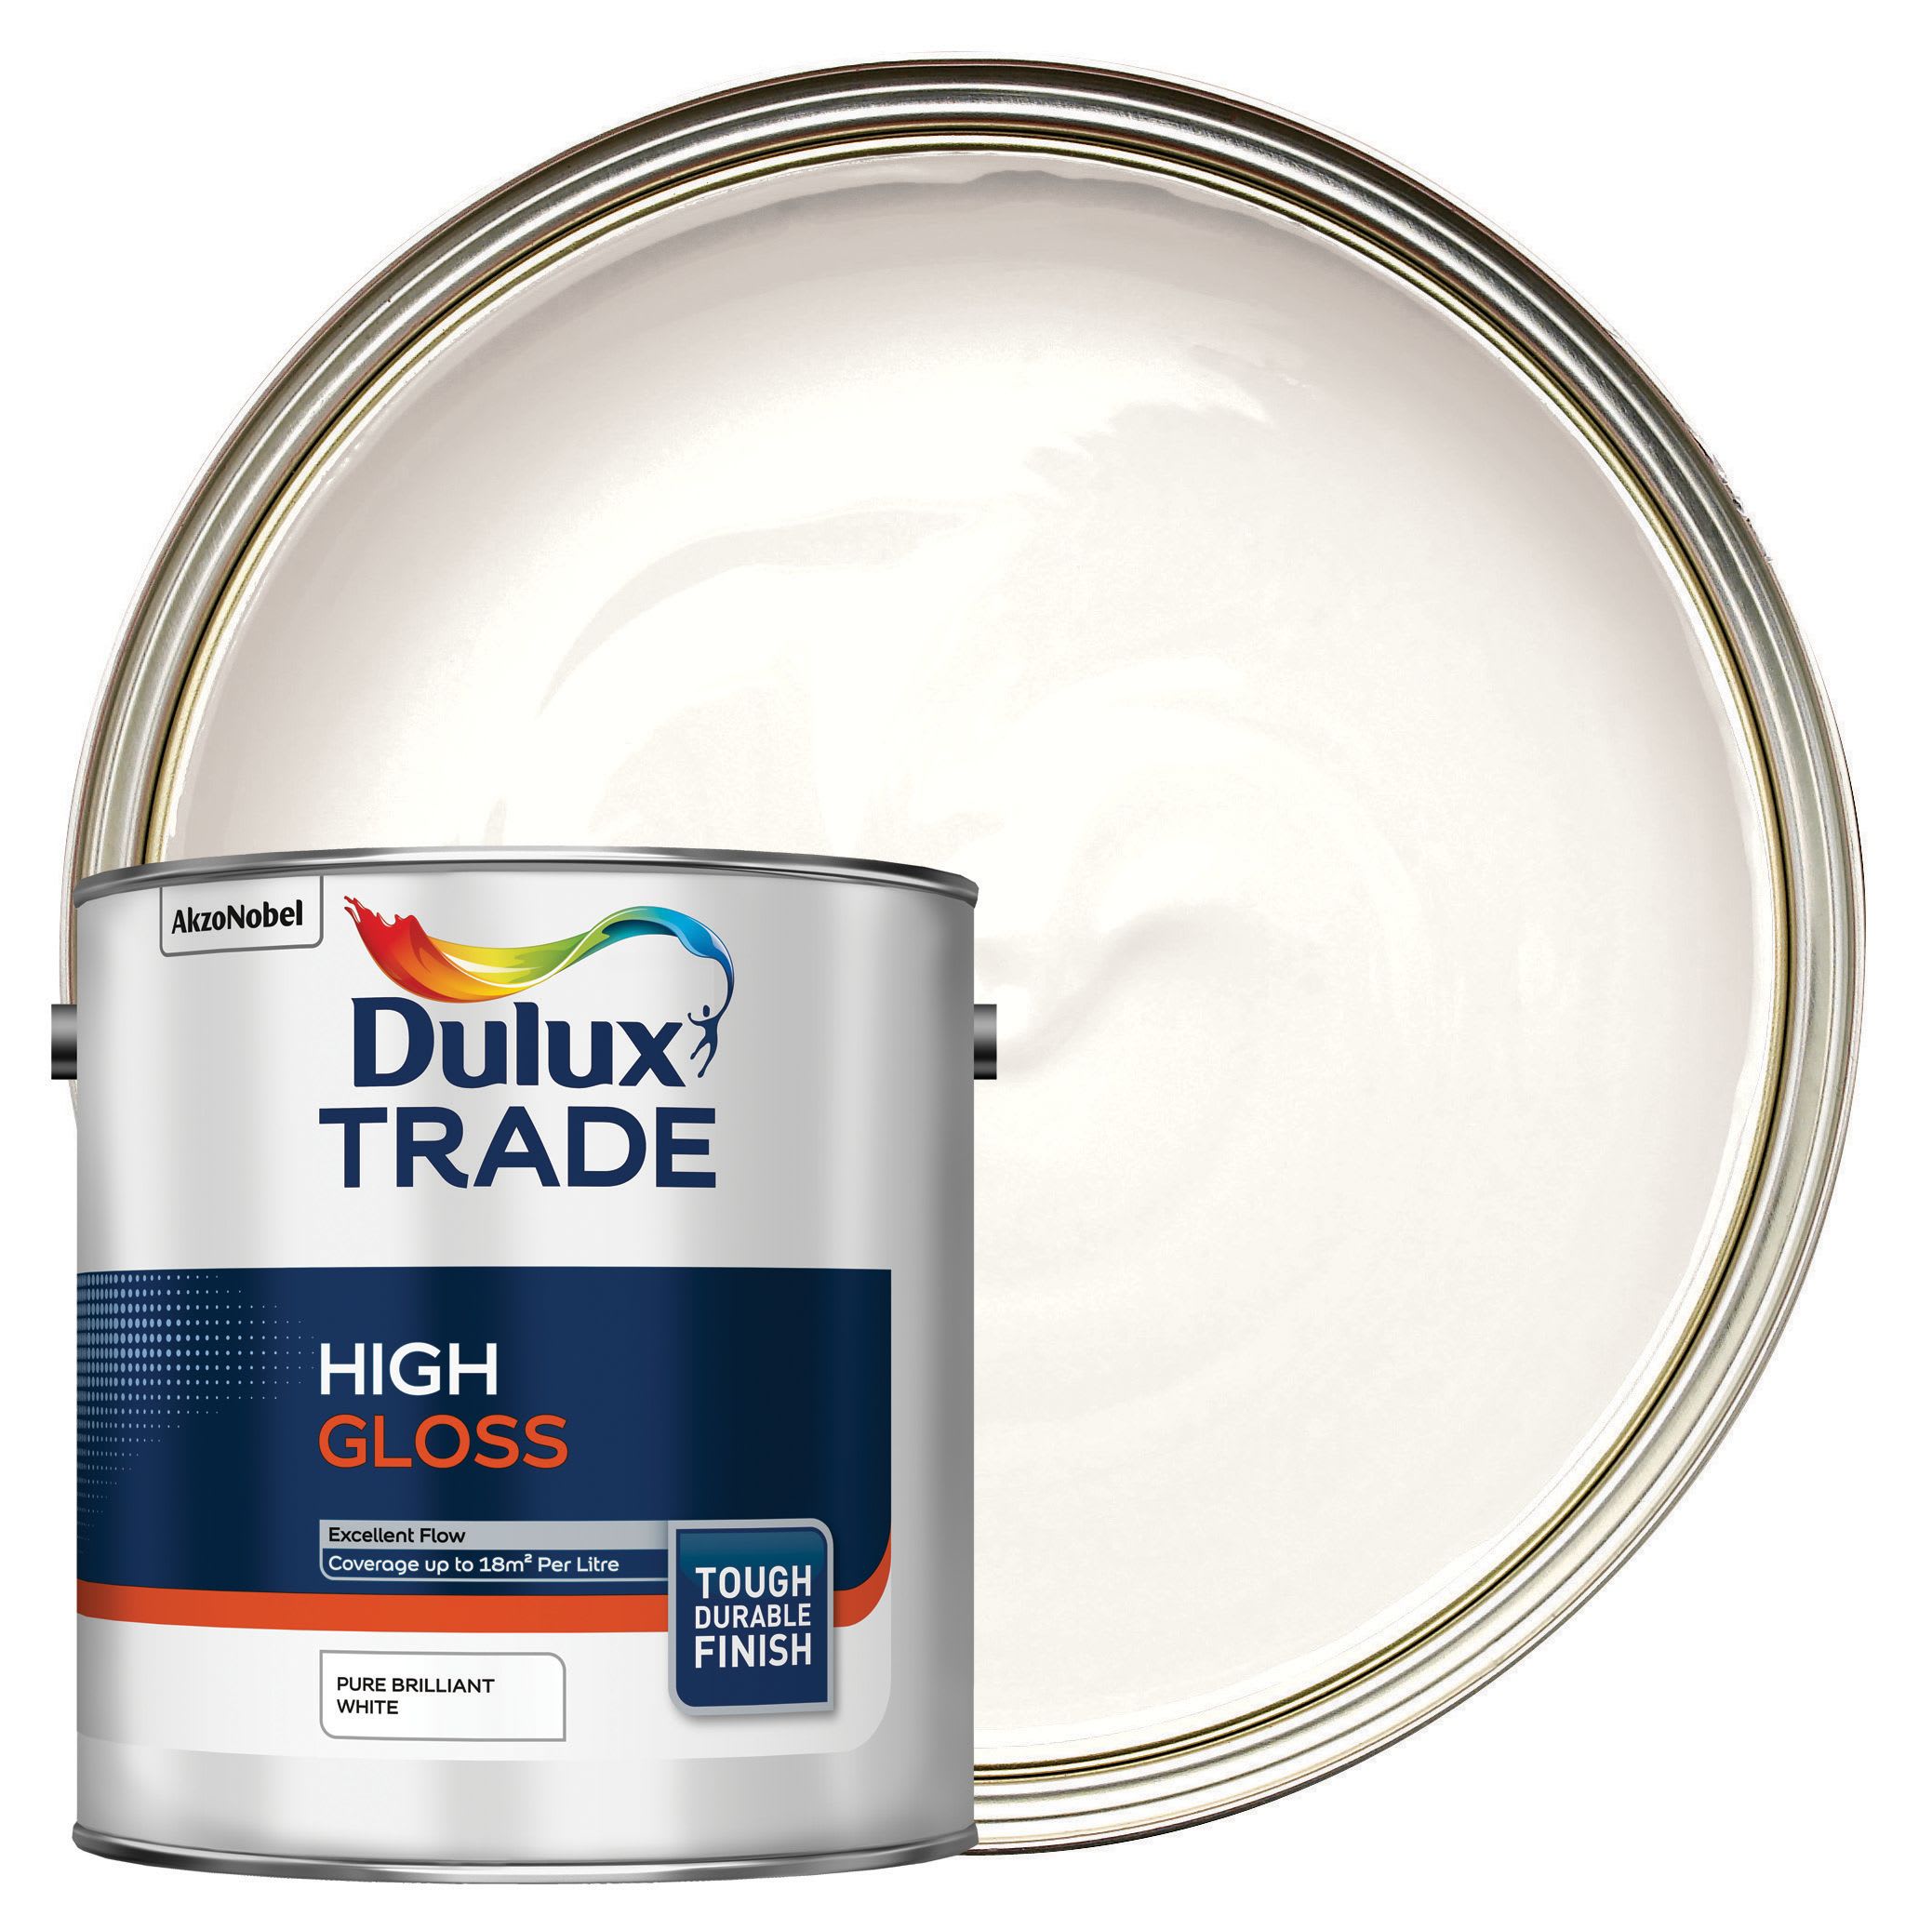 Dulux Trade High Gloss Paint - Pure Brilliant